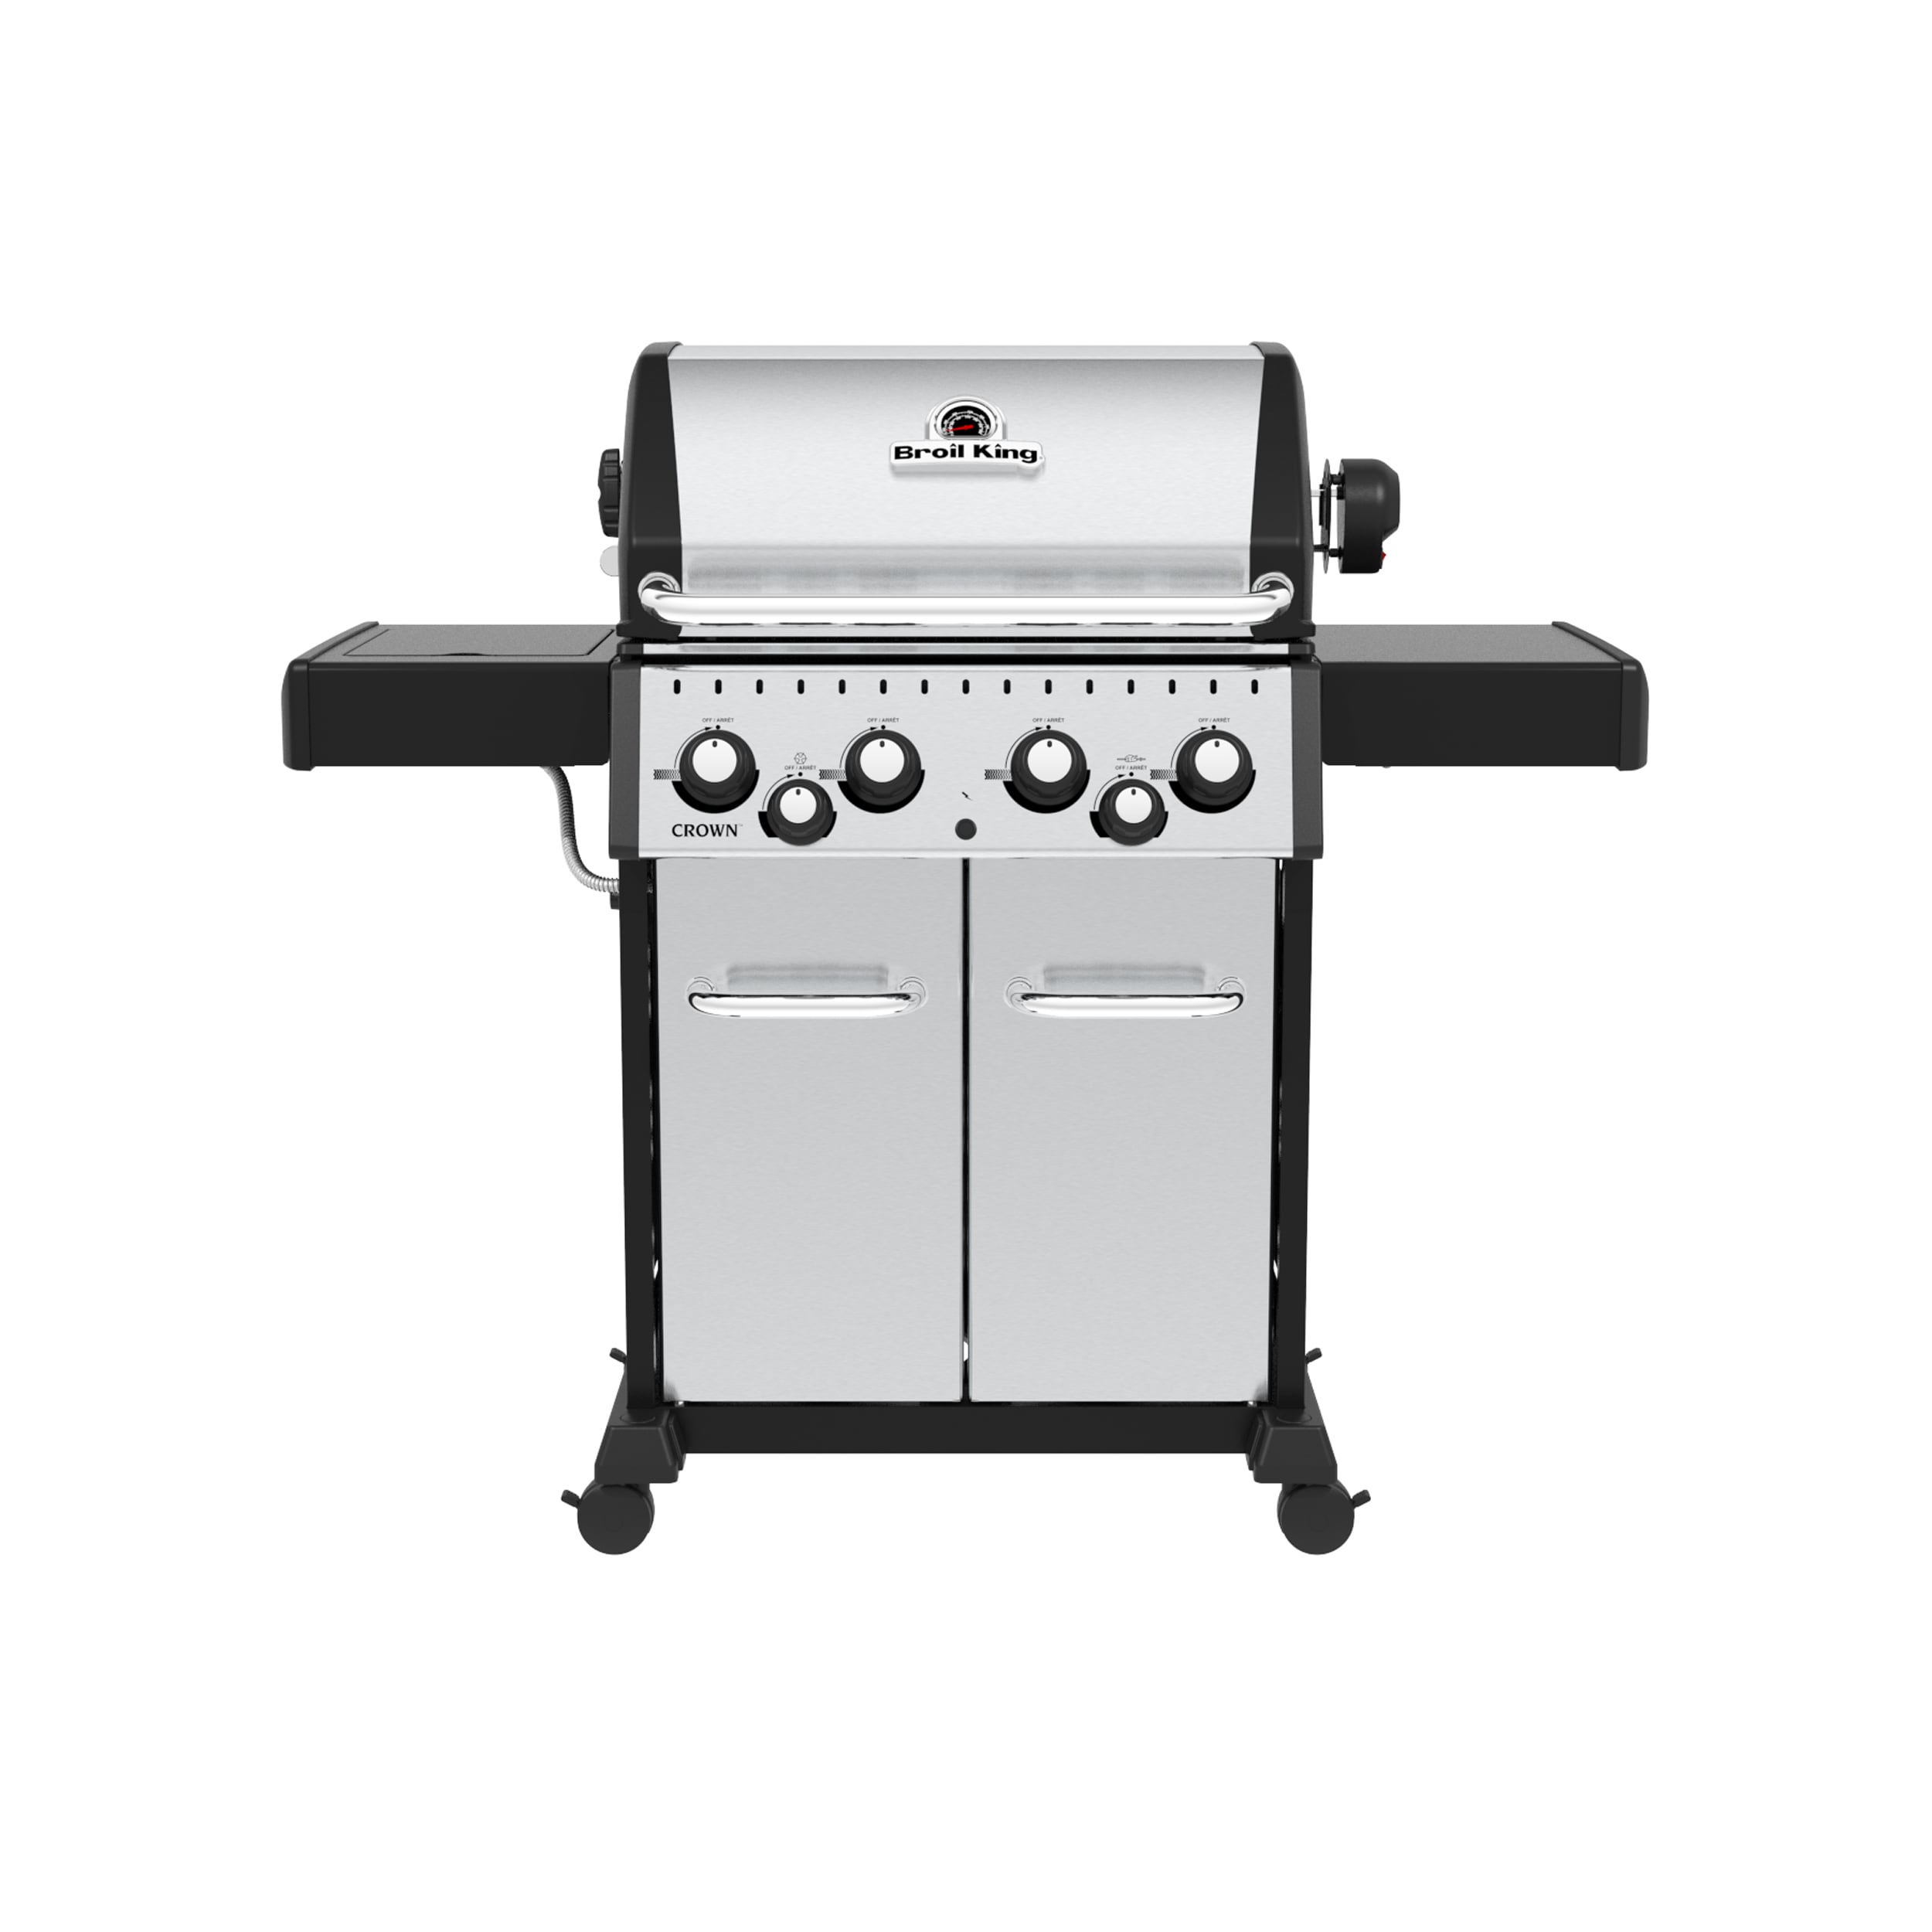 Broil King Crown S 490 Stainless Steel 4-Burner Liquid Propane Gas Grill with 1 Side with Rotisserie Burner in the Gas Grills department at